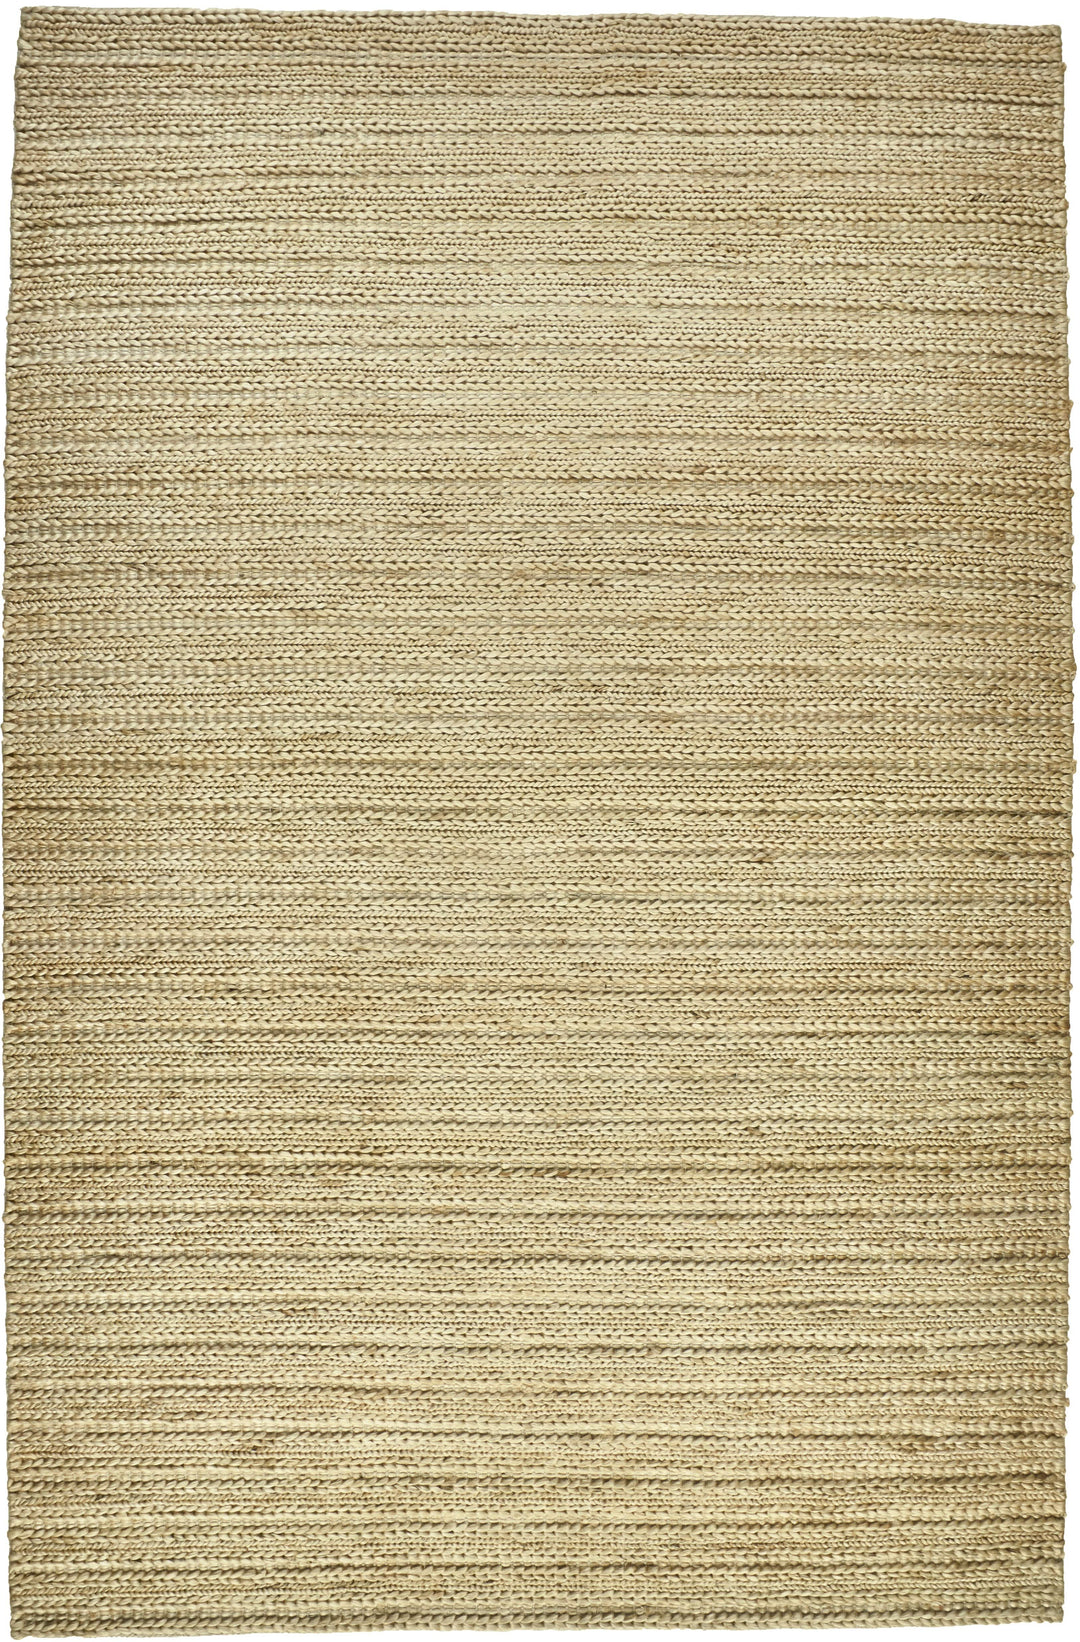 Feizy Feizy Kaelani Natural Handmade Rug - Available in 5 Sizes - Ivory Cream 4' x 6' 6850769FIVY000C00